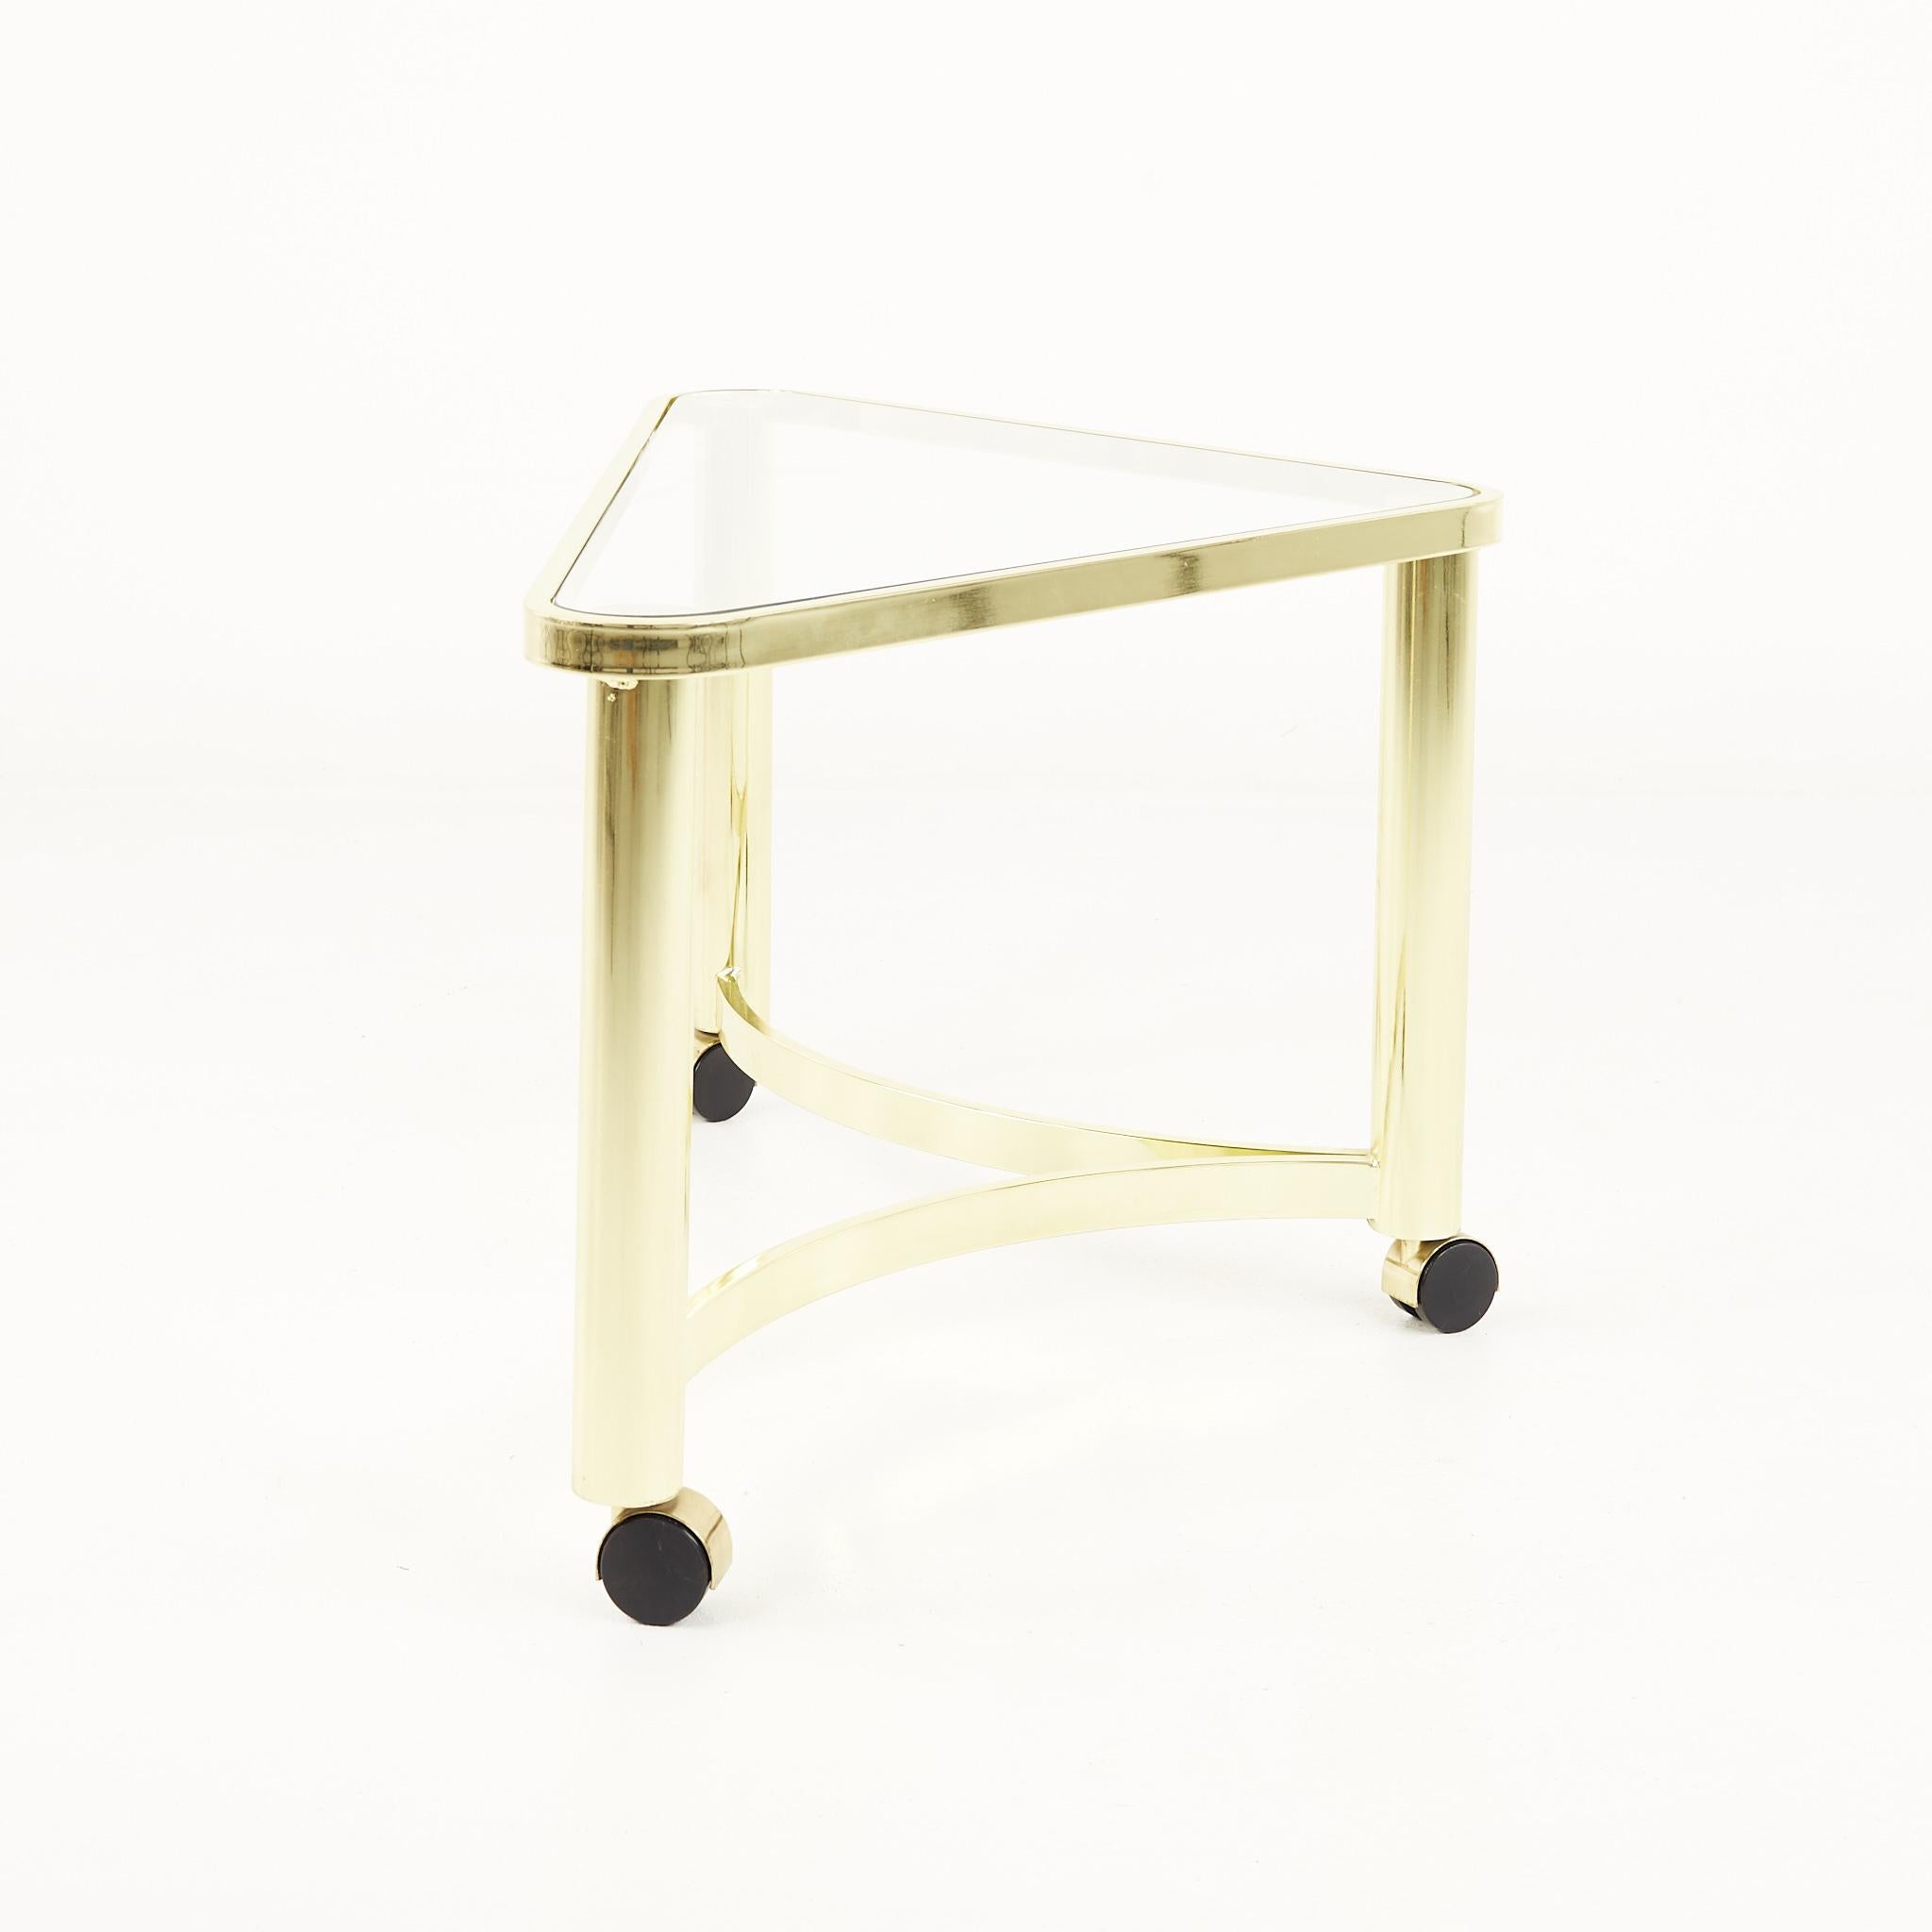 American Mid Century Brass and Glass Side Table with Casters